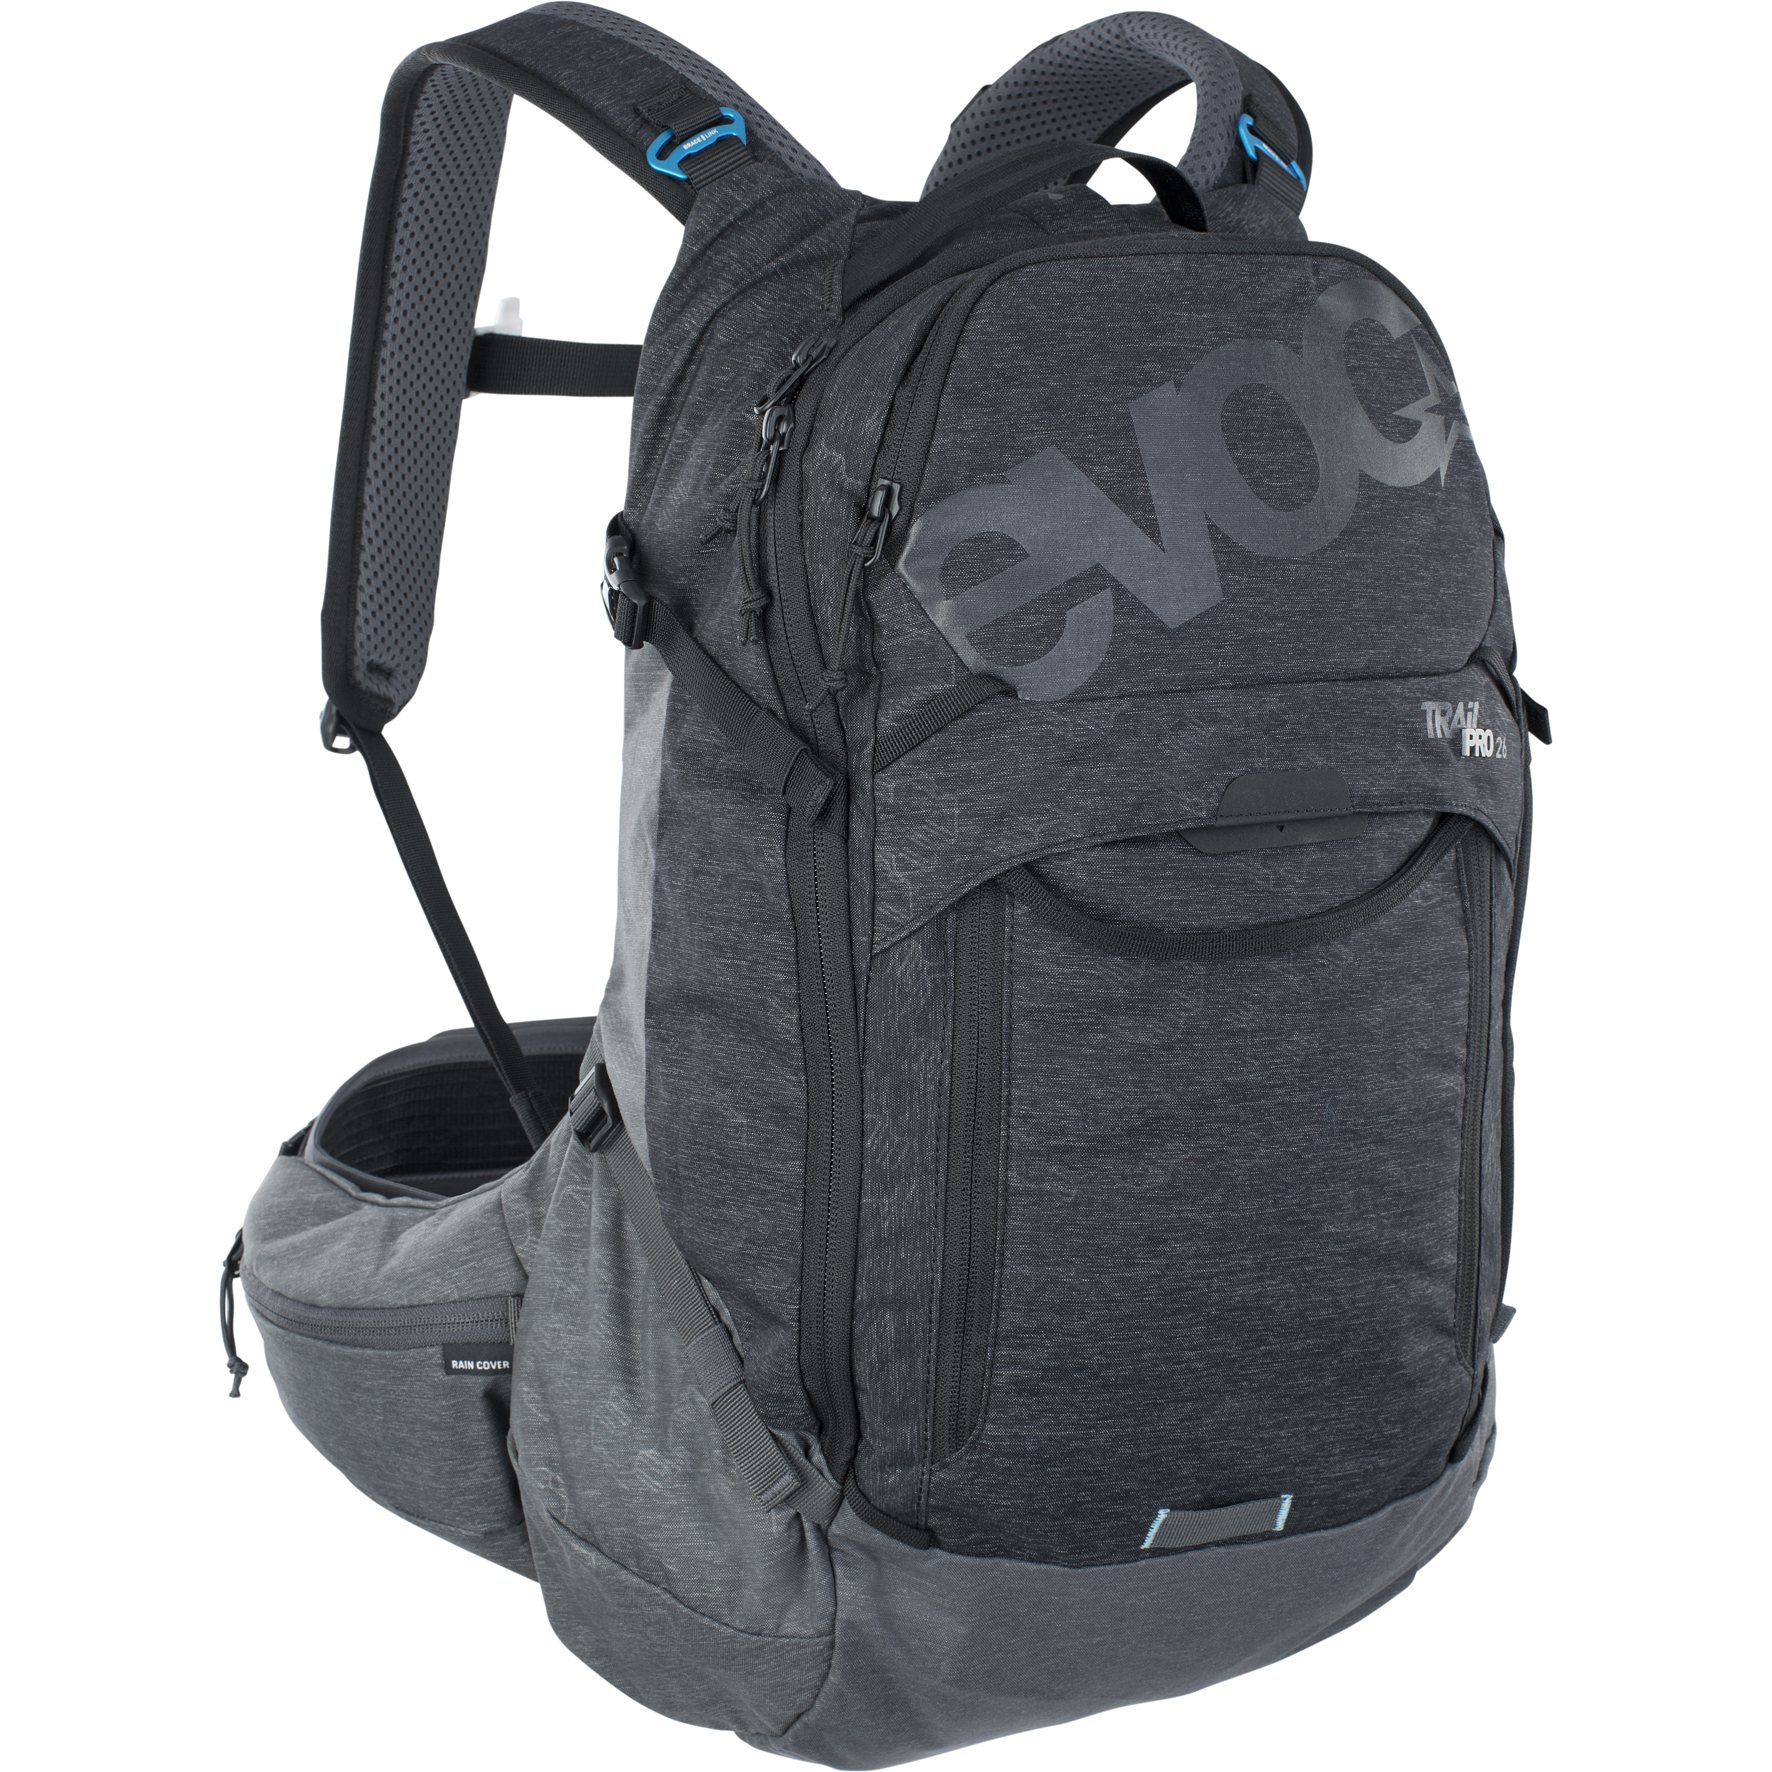 Picture of EVOC Trail Pro 26L Protector Backpack - Black/Carbon Grey